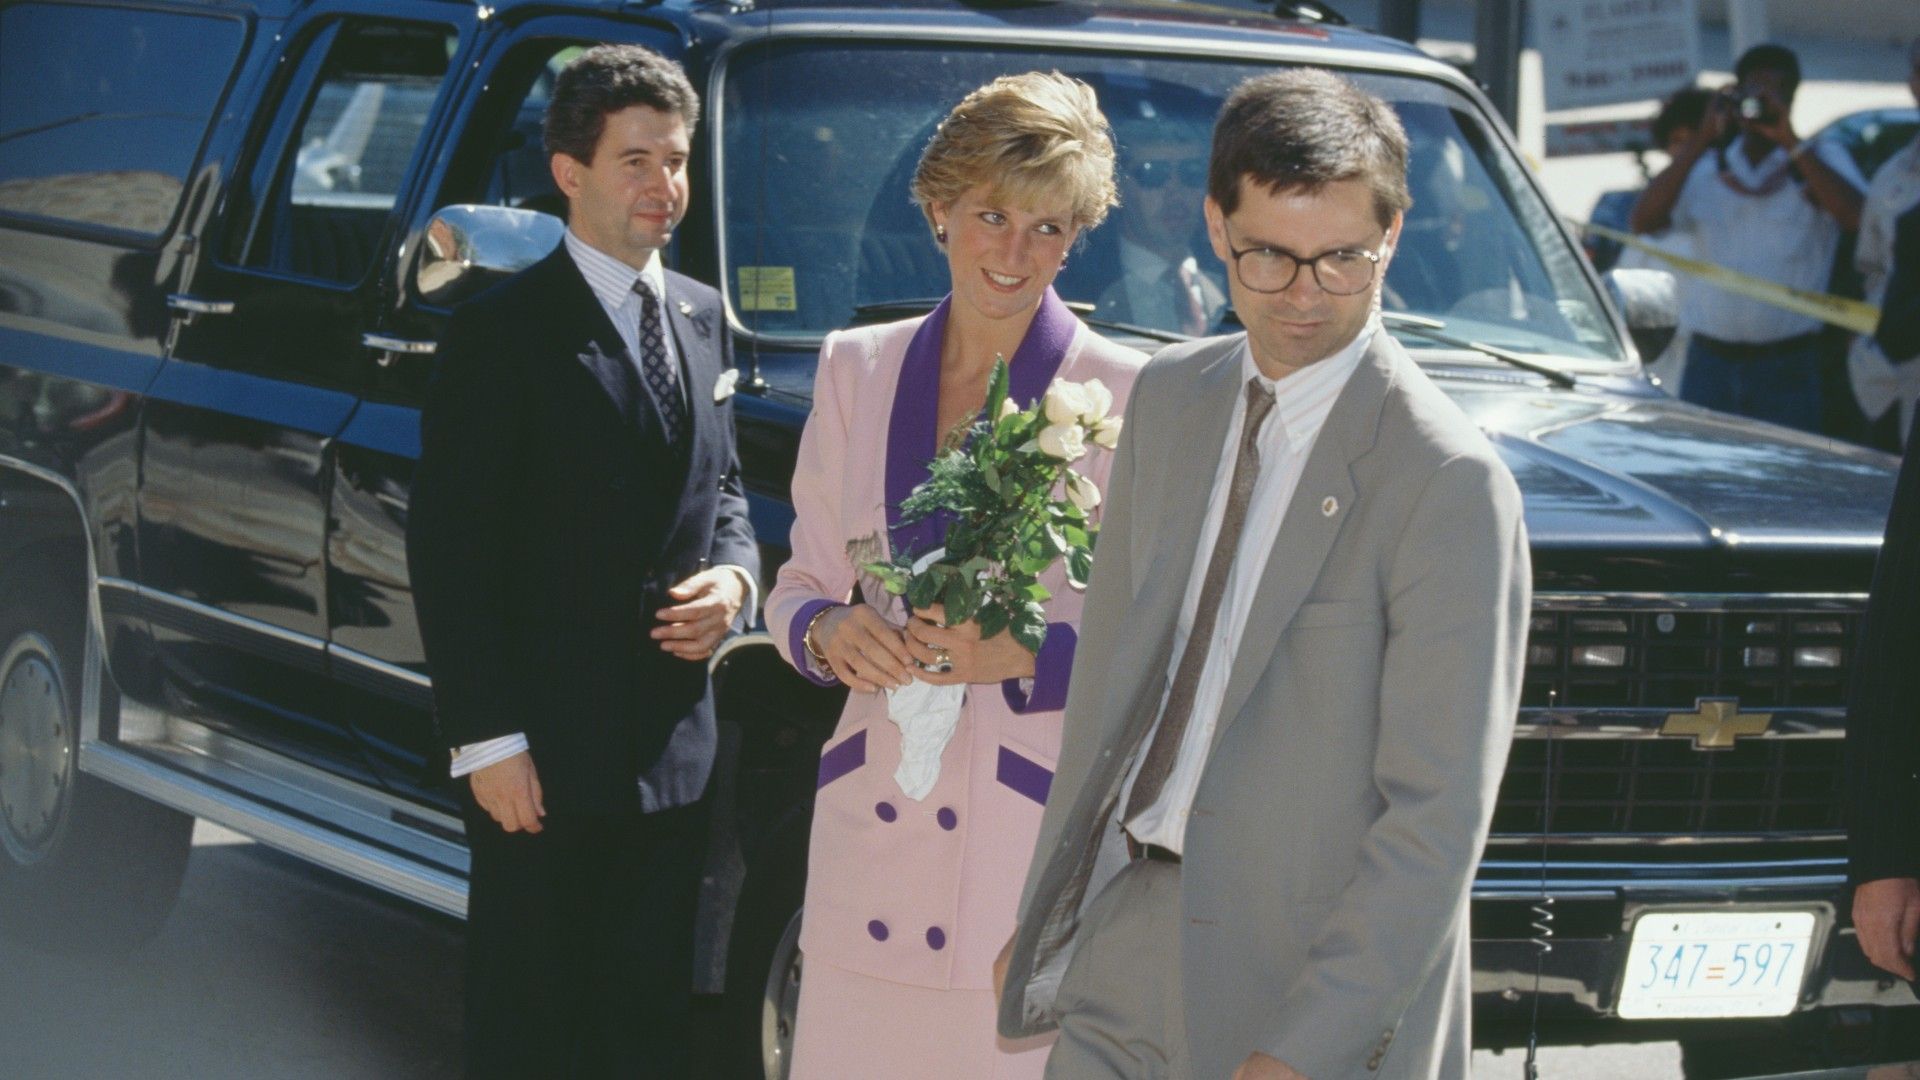 <p>                     Following her divorce from the then-Prince of Wales in 1996, Diana continued to be offered royal protection from the Metropolitan Police.                   </p>                                      <p>                     It's claimed that this is something she was happy to keep when she was travelling with her sons Prince William and Prince Harry, but she reportedly refused it when travelling alone, in order to keep some separation between herself and the royal family.                   </p>                                      <p>                     As such, in the final years of her life, she mostly used police protection when out at public events, rather than the royal protection that the rest of the royal family used.                   </p>